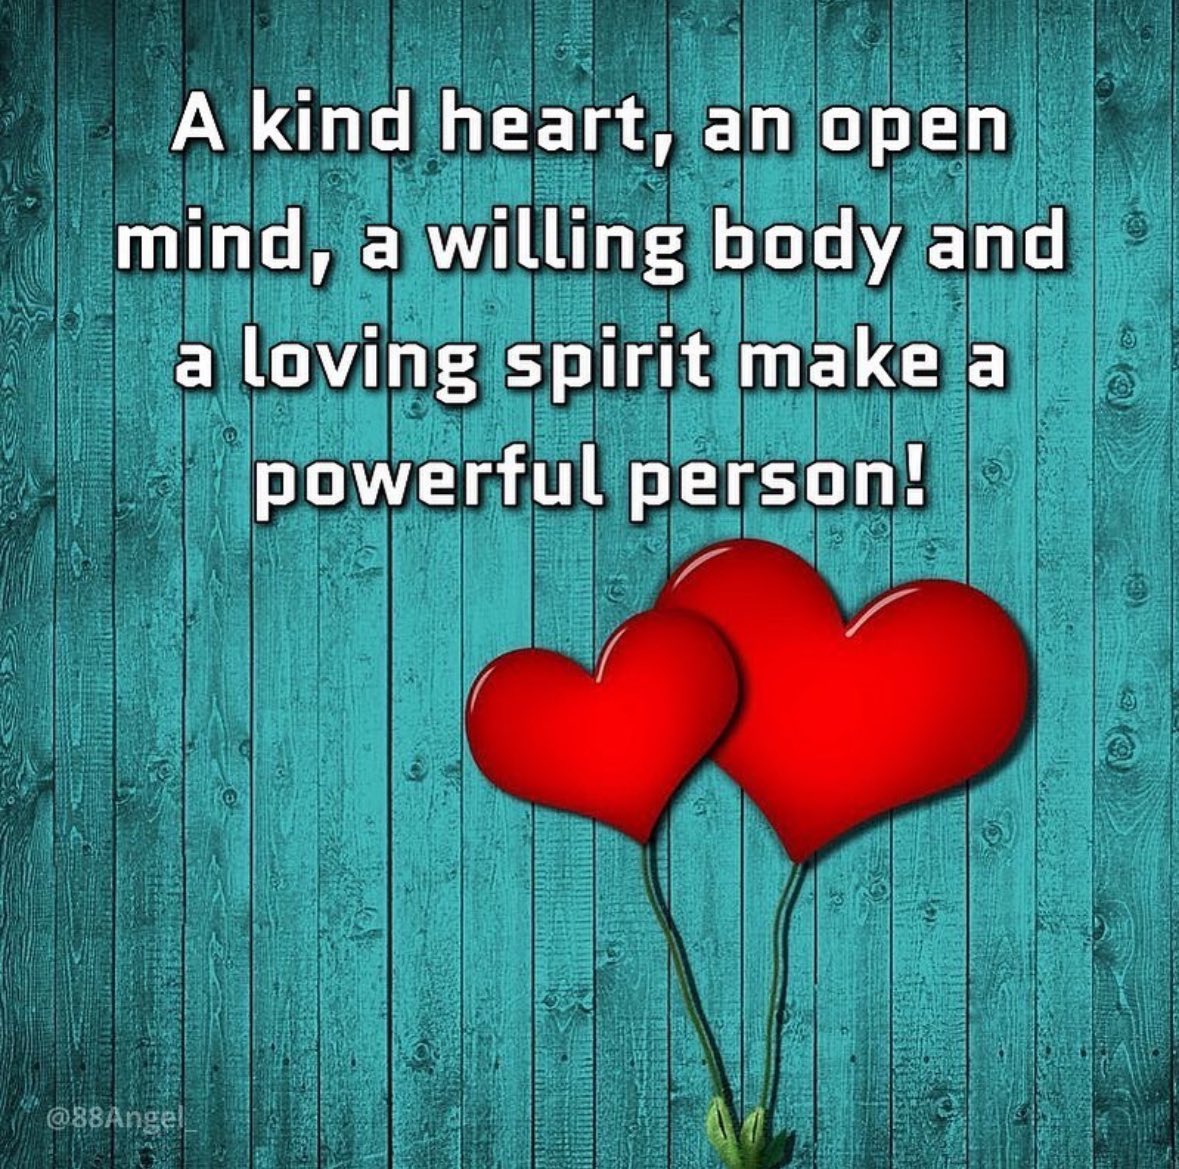 A kind heart, an open mind, a willing body and a loving spirit make a powerful person! #fridaymorning #fridaydaymotivation #FridayFeeIing #fridaymood #friday #motivation #quotes #quote #Inspiration #inspirationalquotes #inspirational